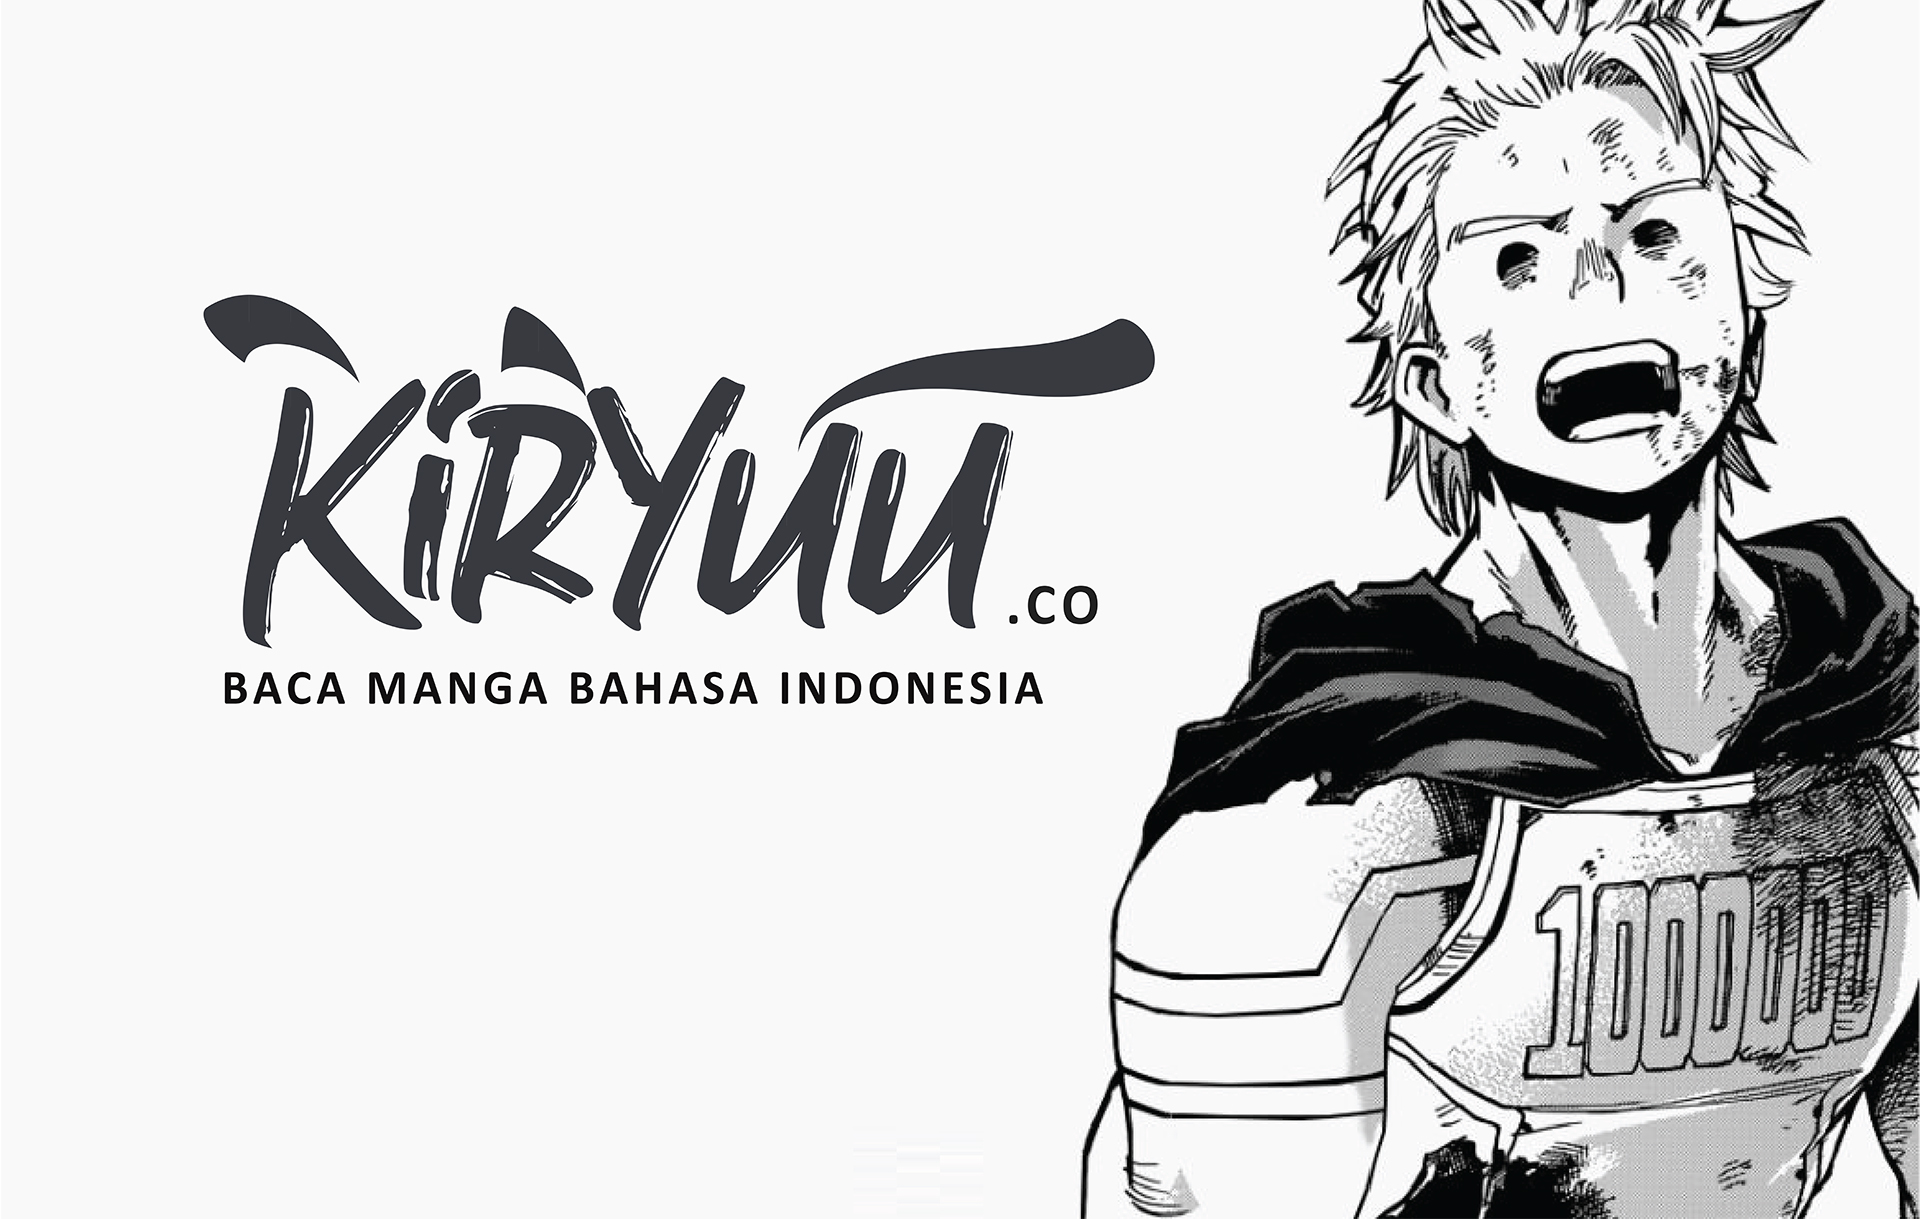 Little Hands Chapter 28.2 Bahasa Indonesia